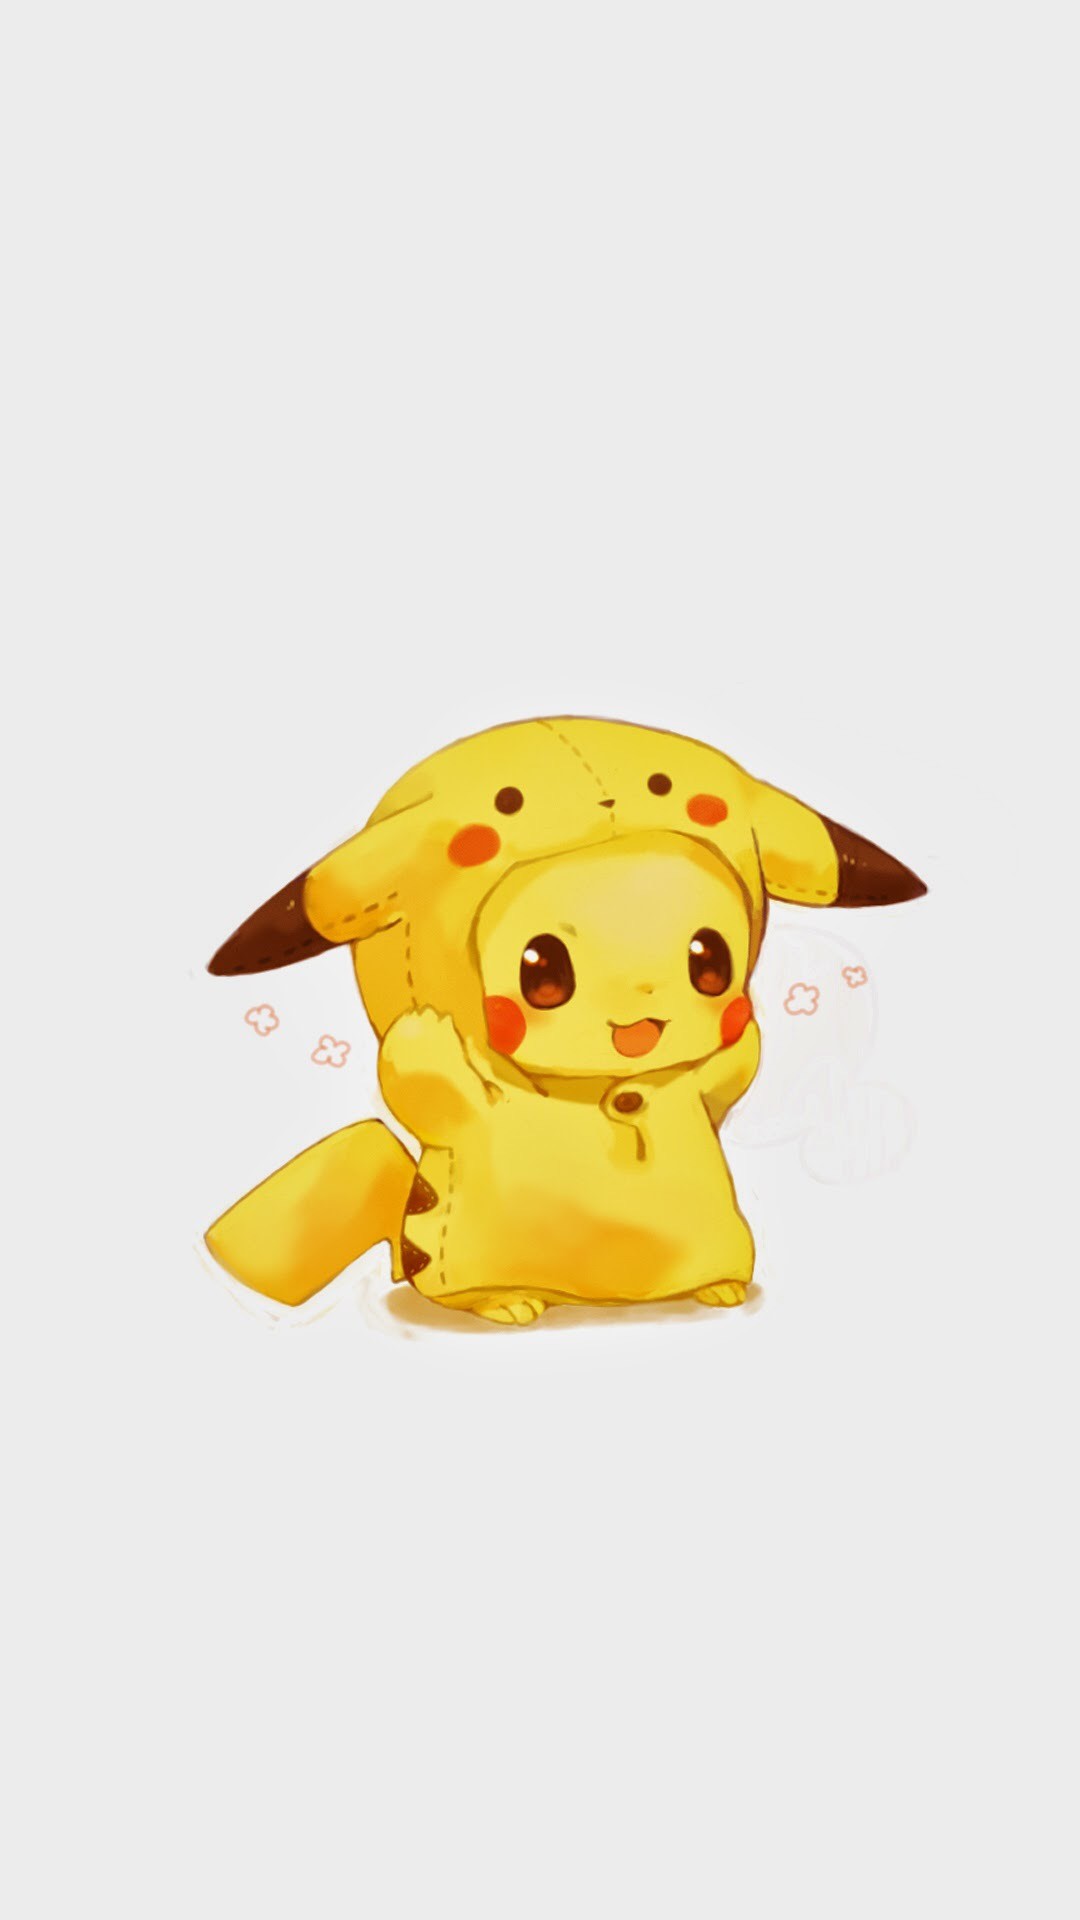 Tap image for more funny cute Pikachu wallpaper Pikachu – mobile9 Wallpapers for